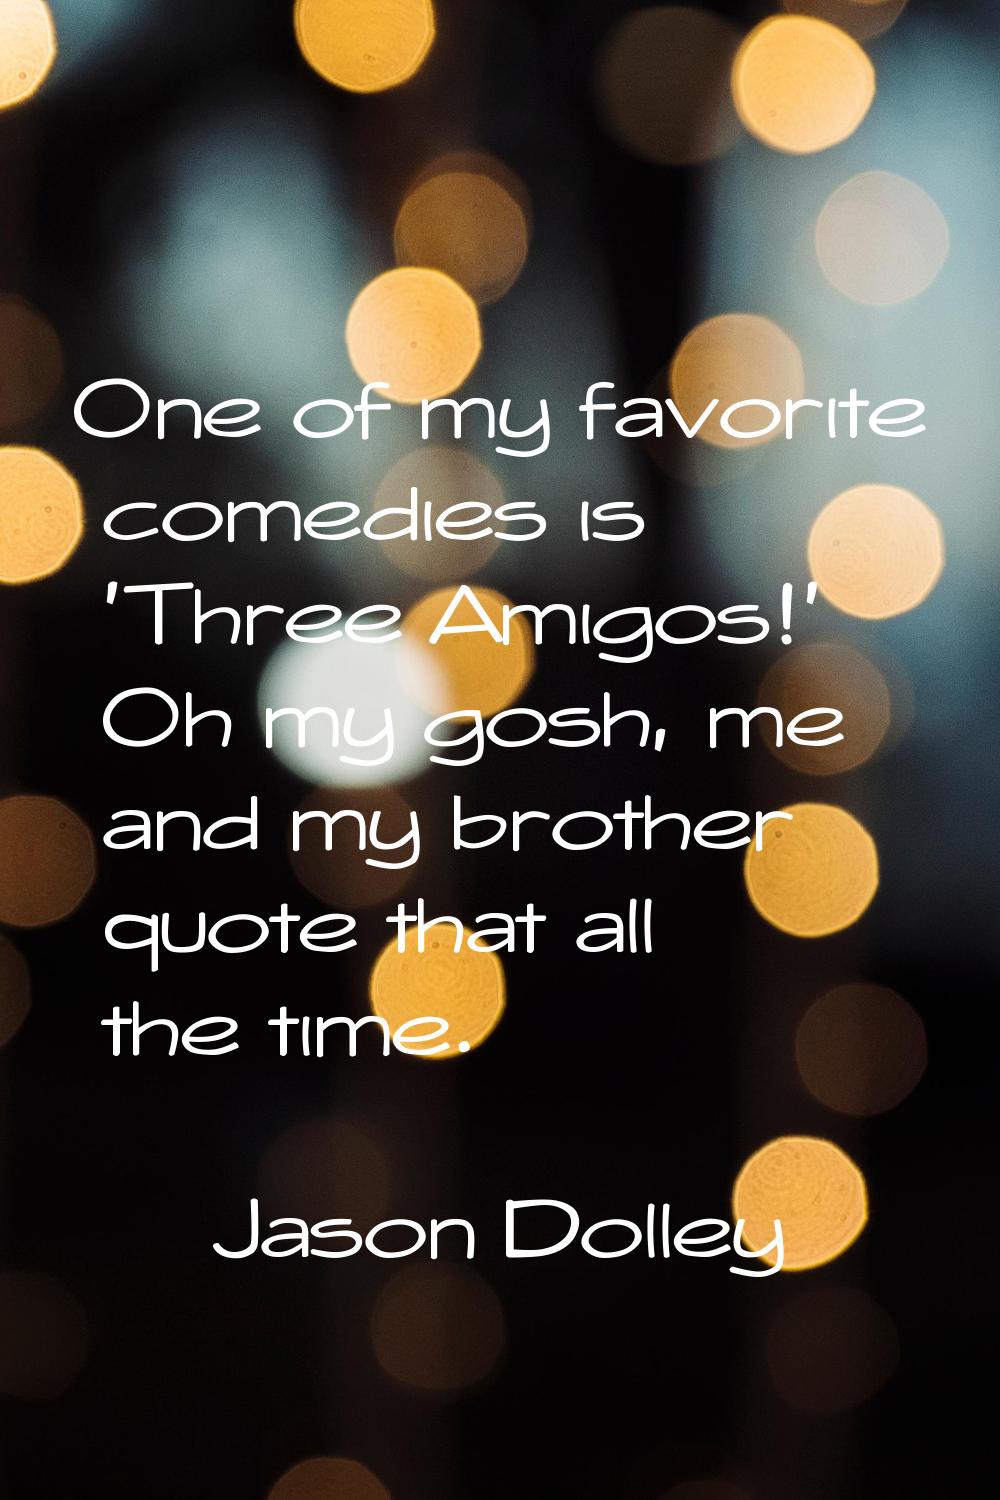 One of my favorite comedies is 'Three Amigos!' Oh my gosh, me and my brother quote that all the tim